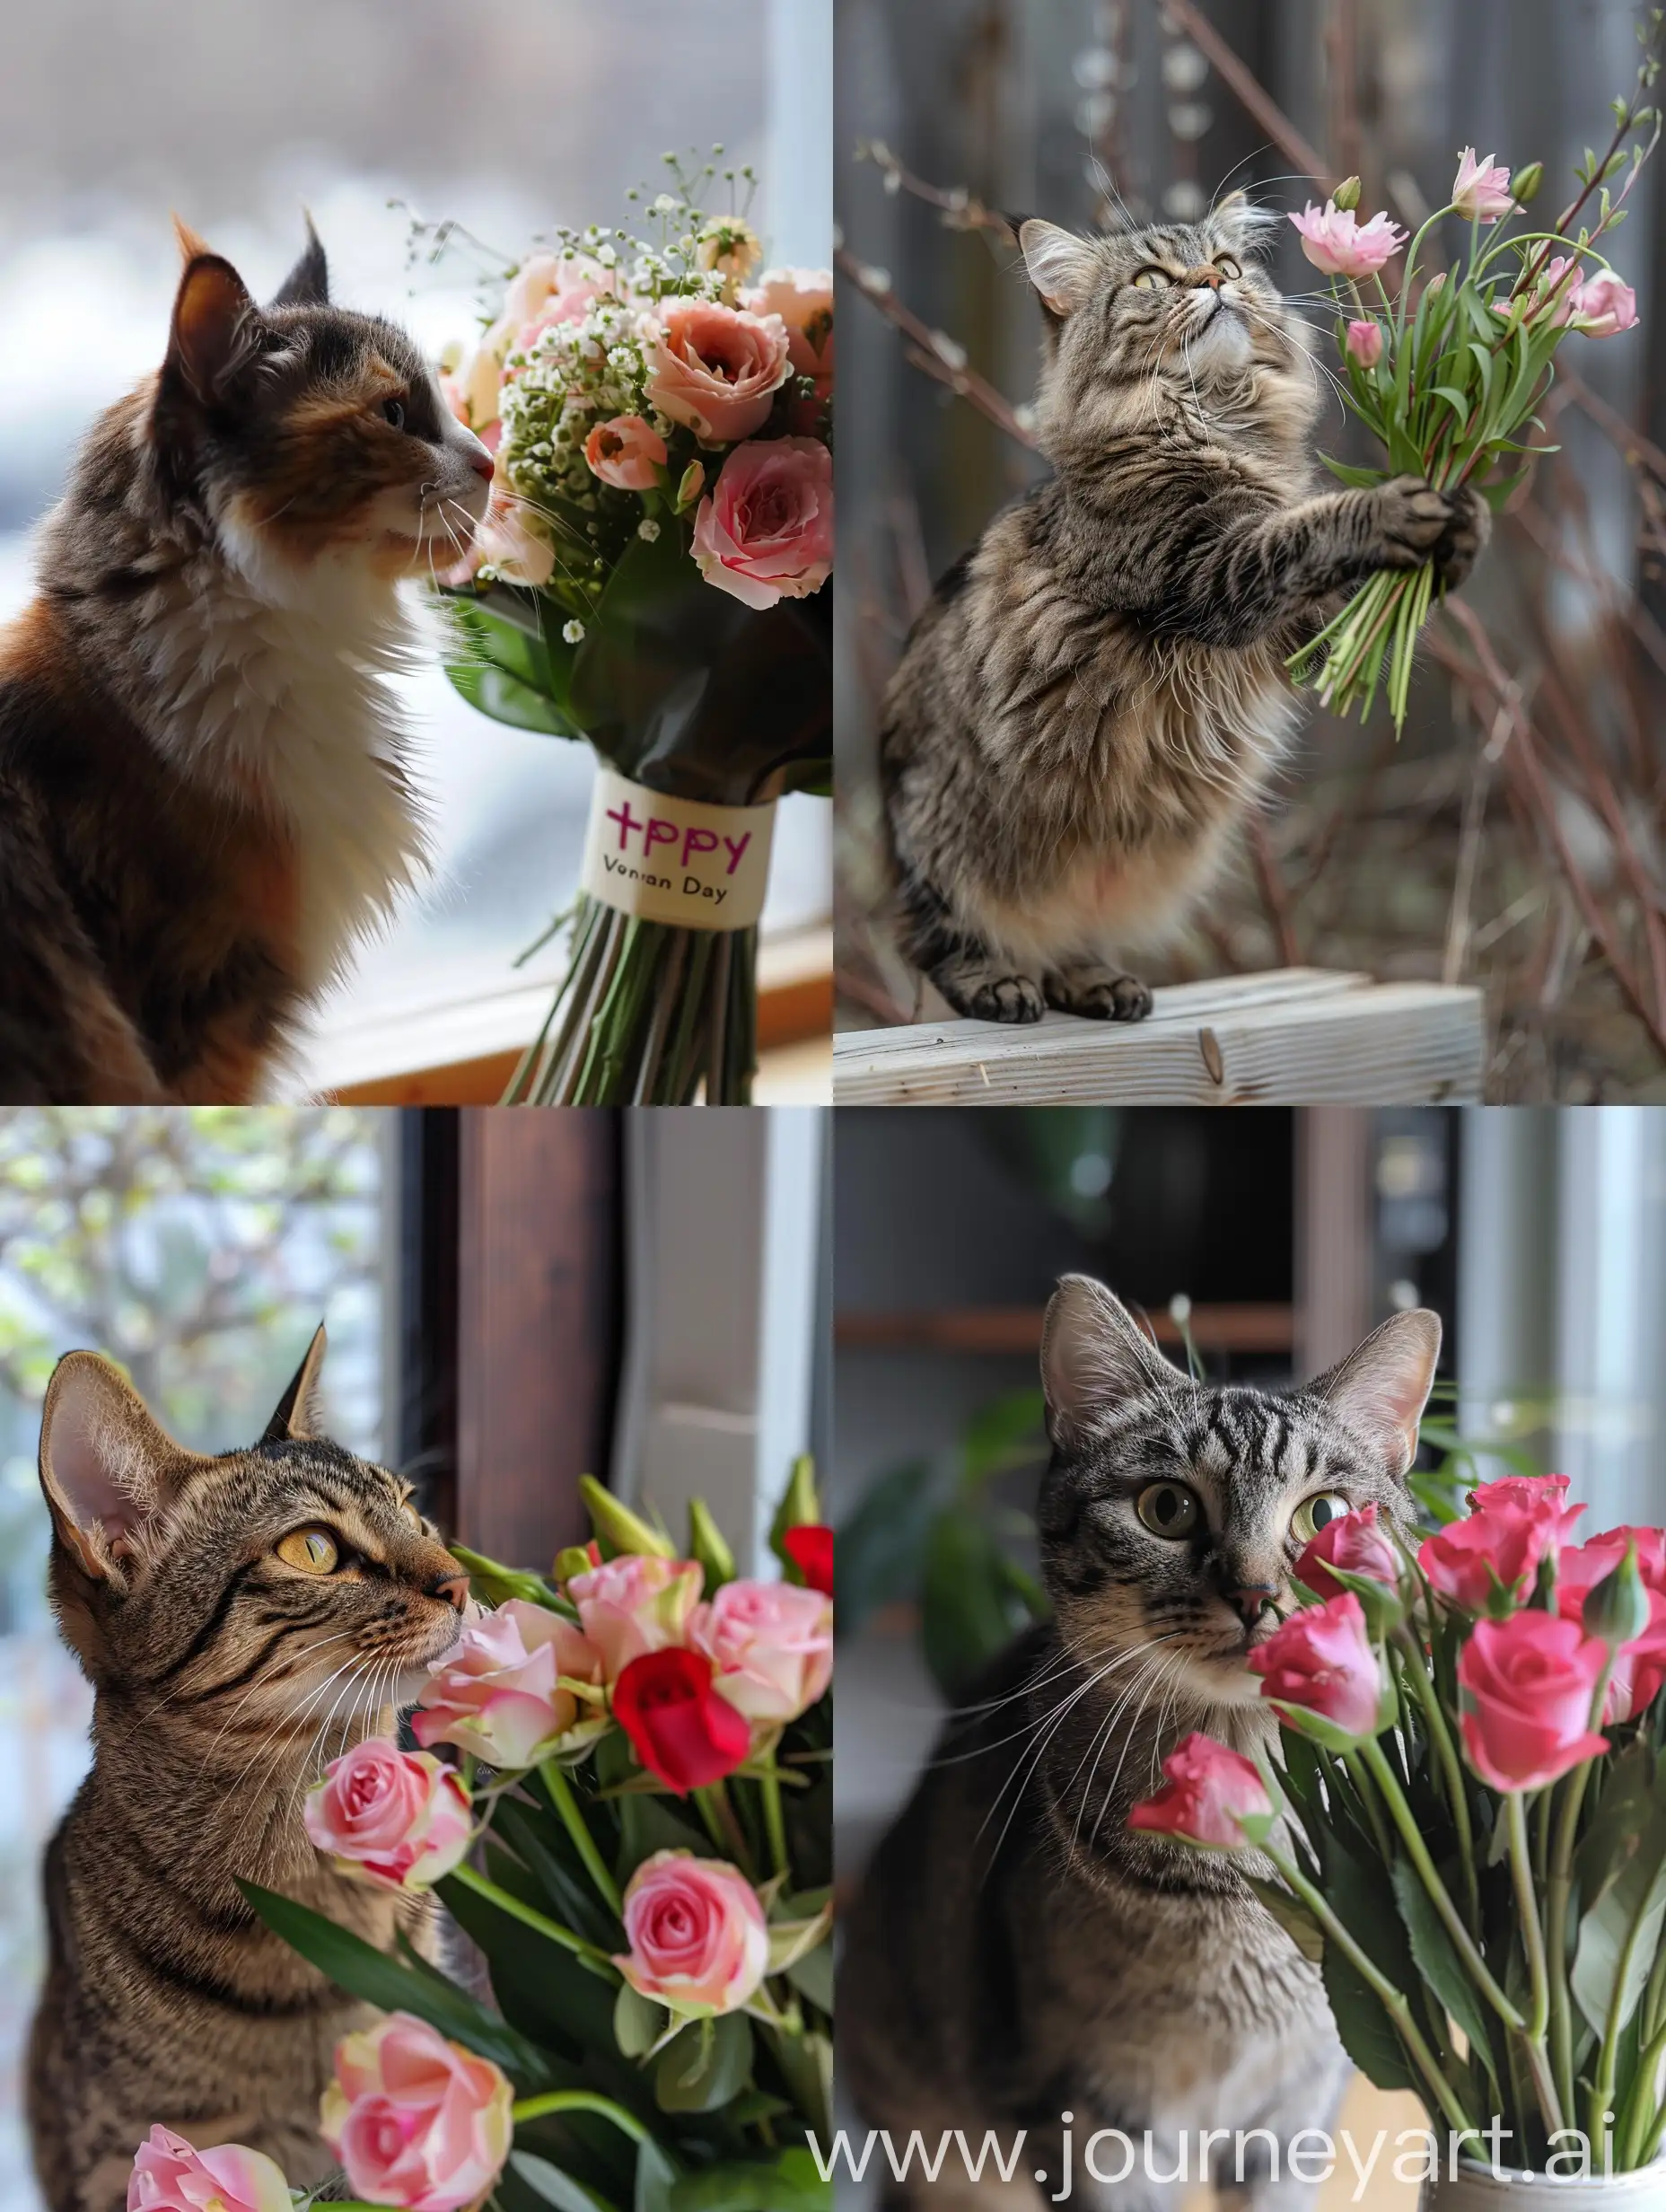 A cat sent a bunch of flowers to his mother to congratulate her on Happy Women's Day